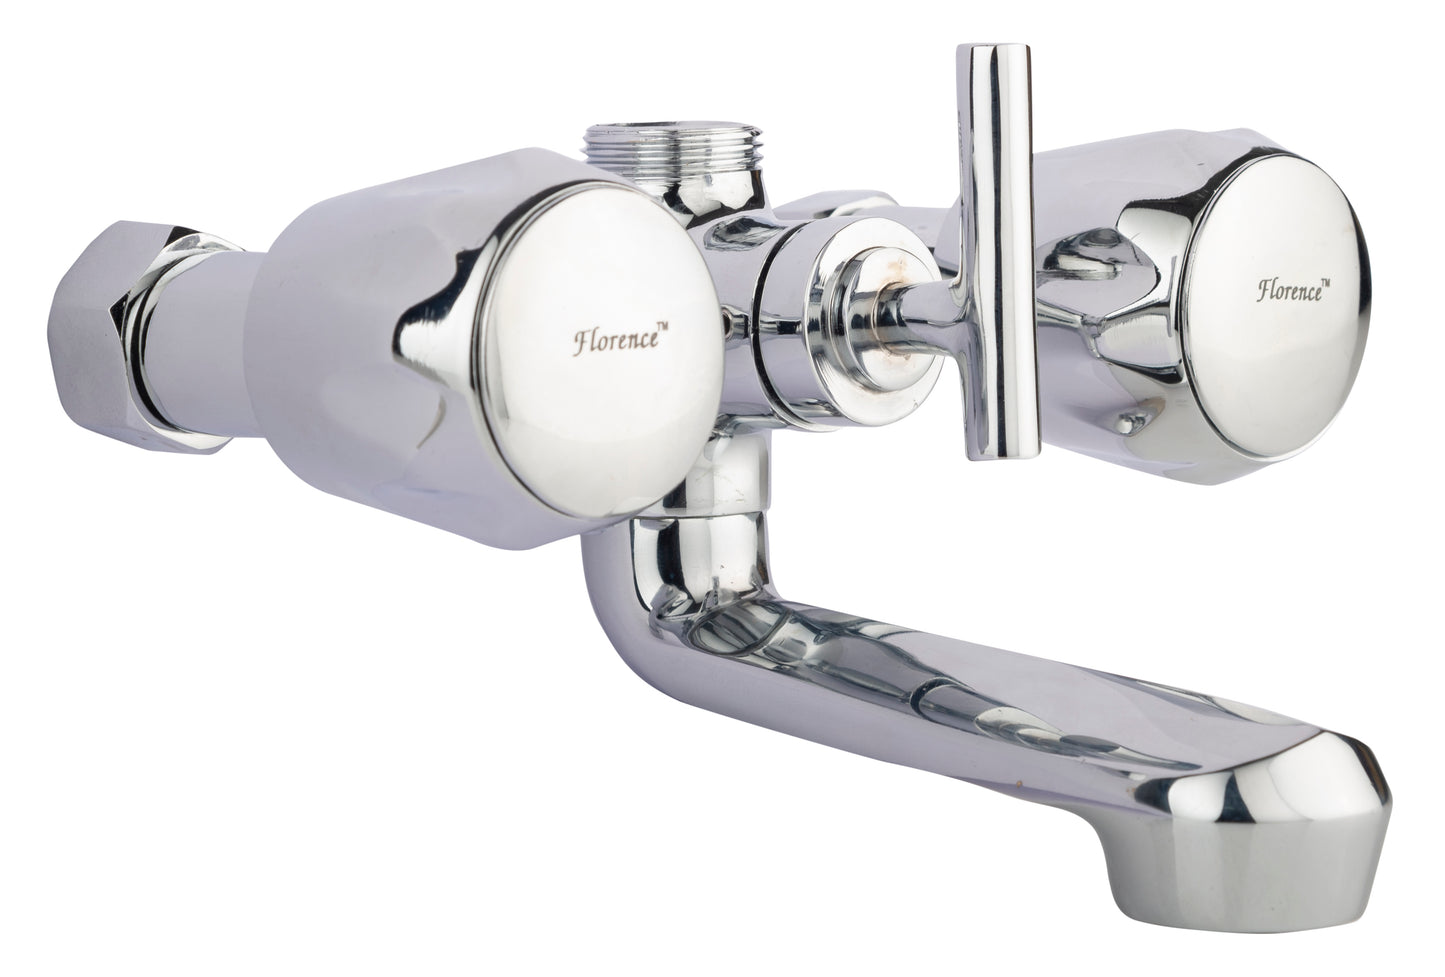 Mixer tap with SF-15 PRO shower-tap filter for hard water with 15 stage